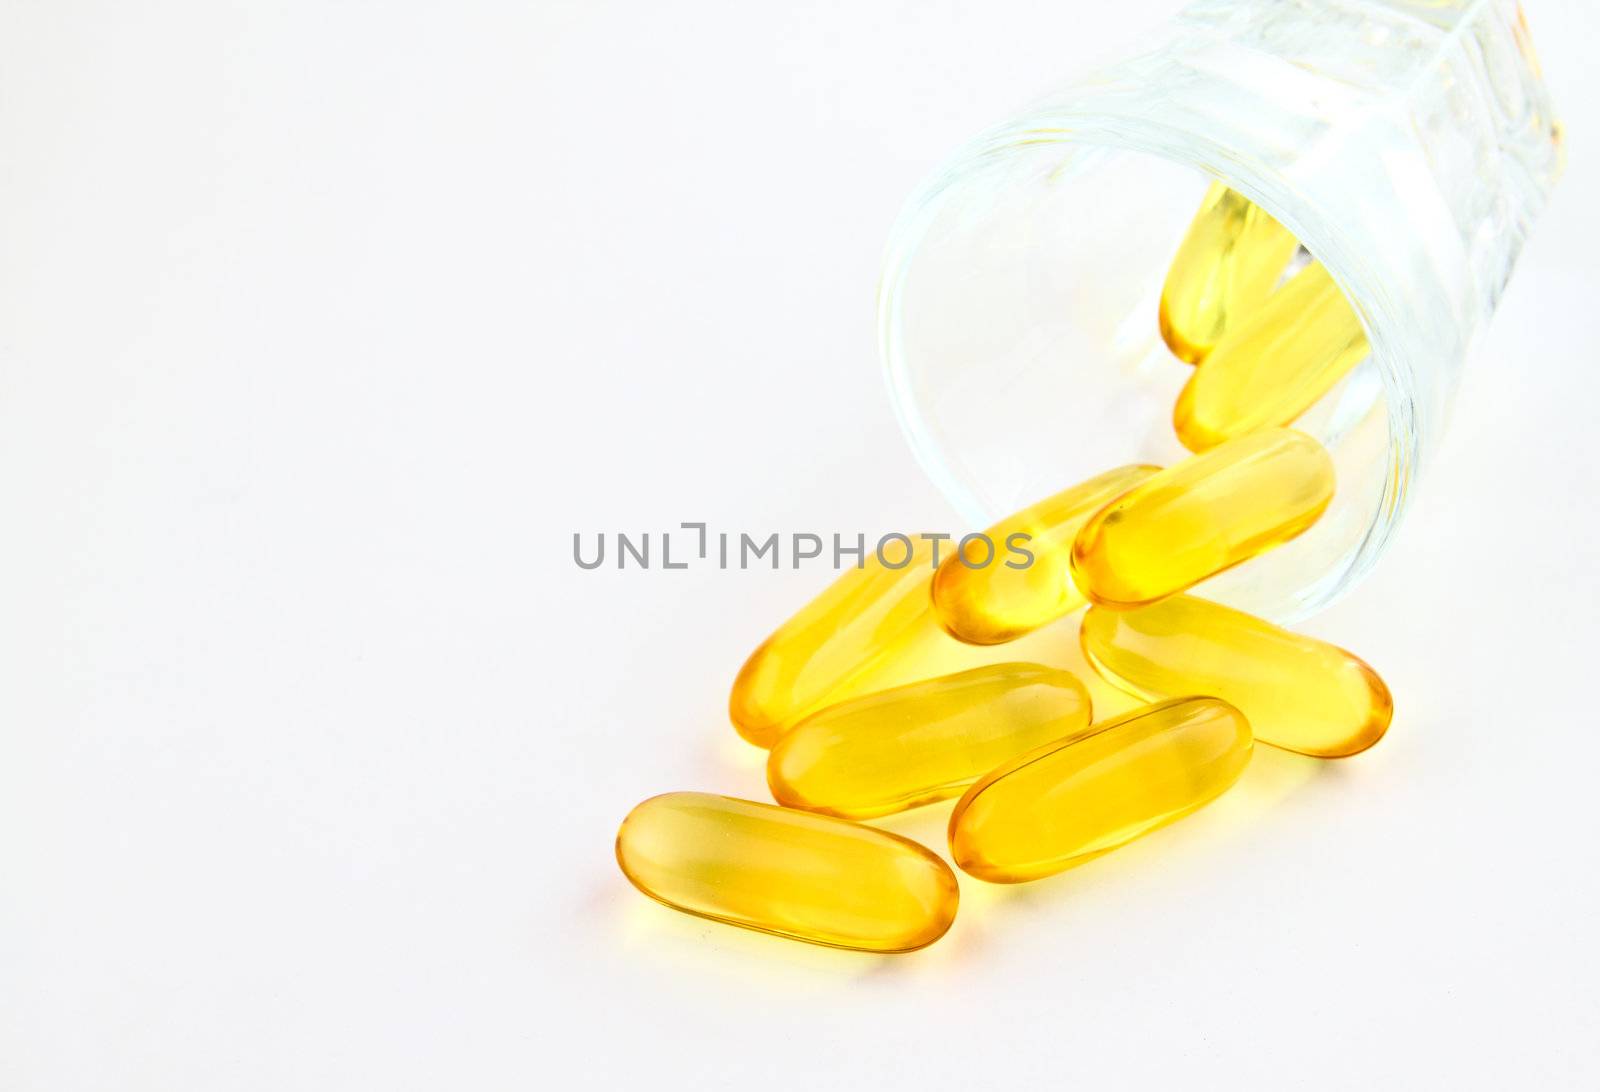 vitamins in glass on white background  by nuchylee